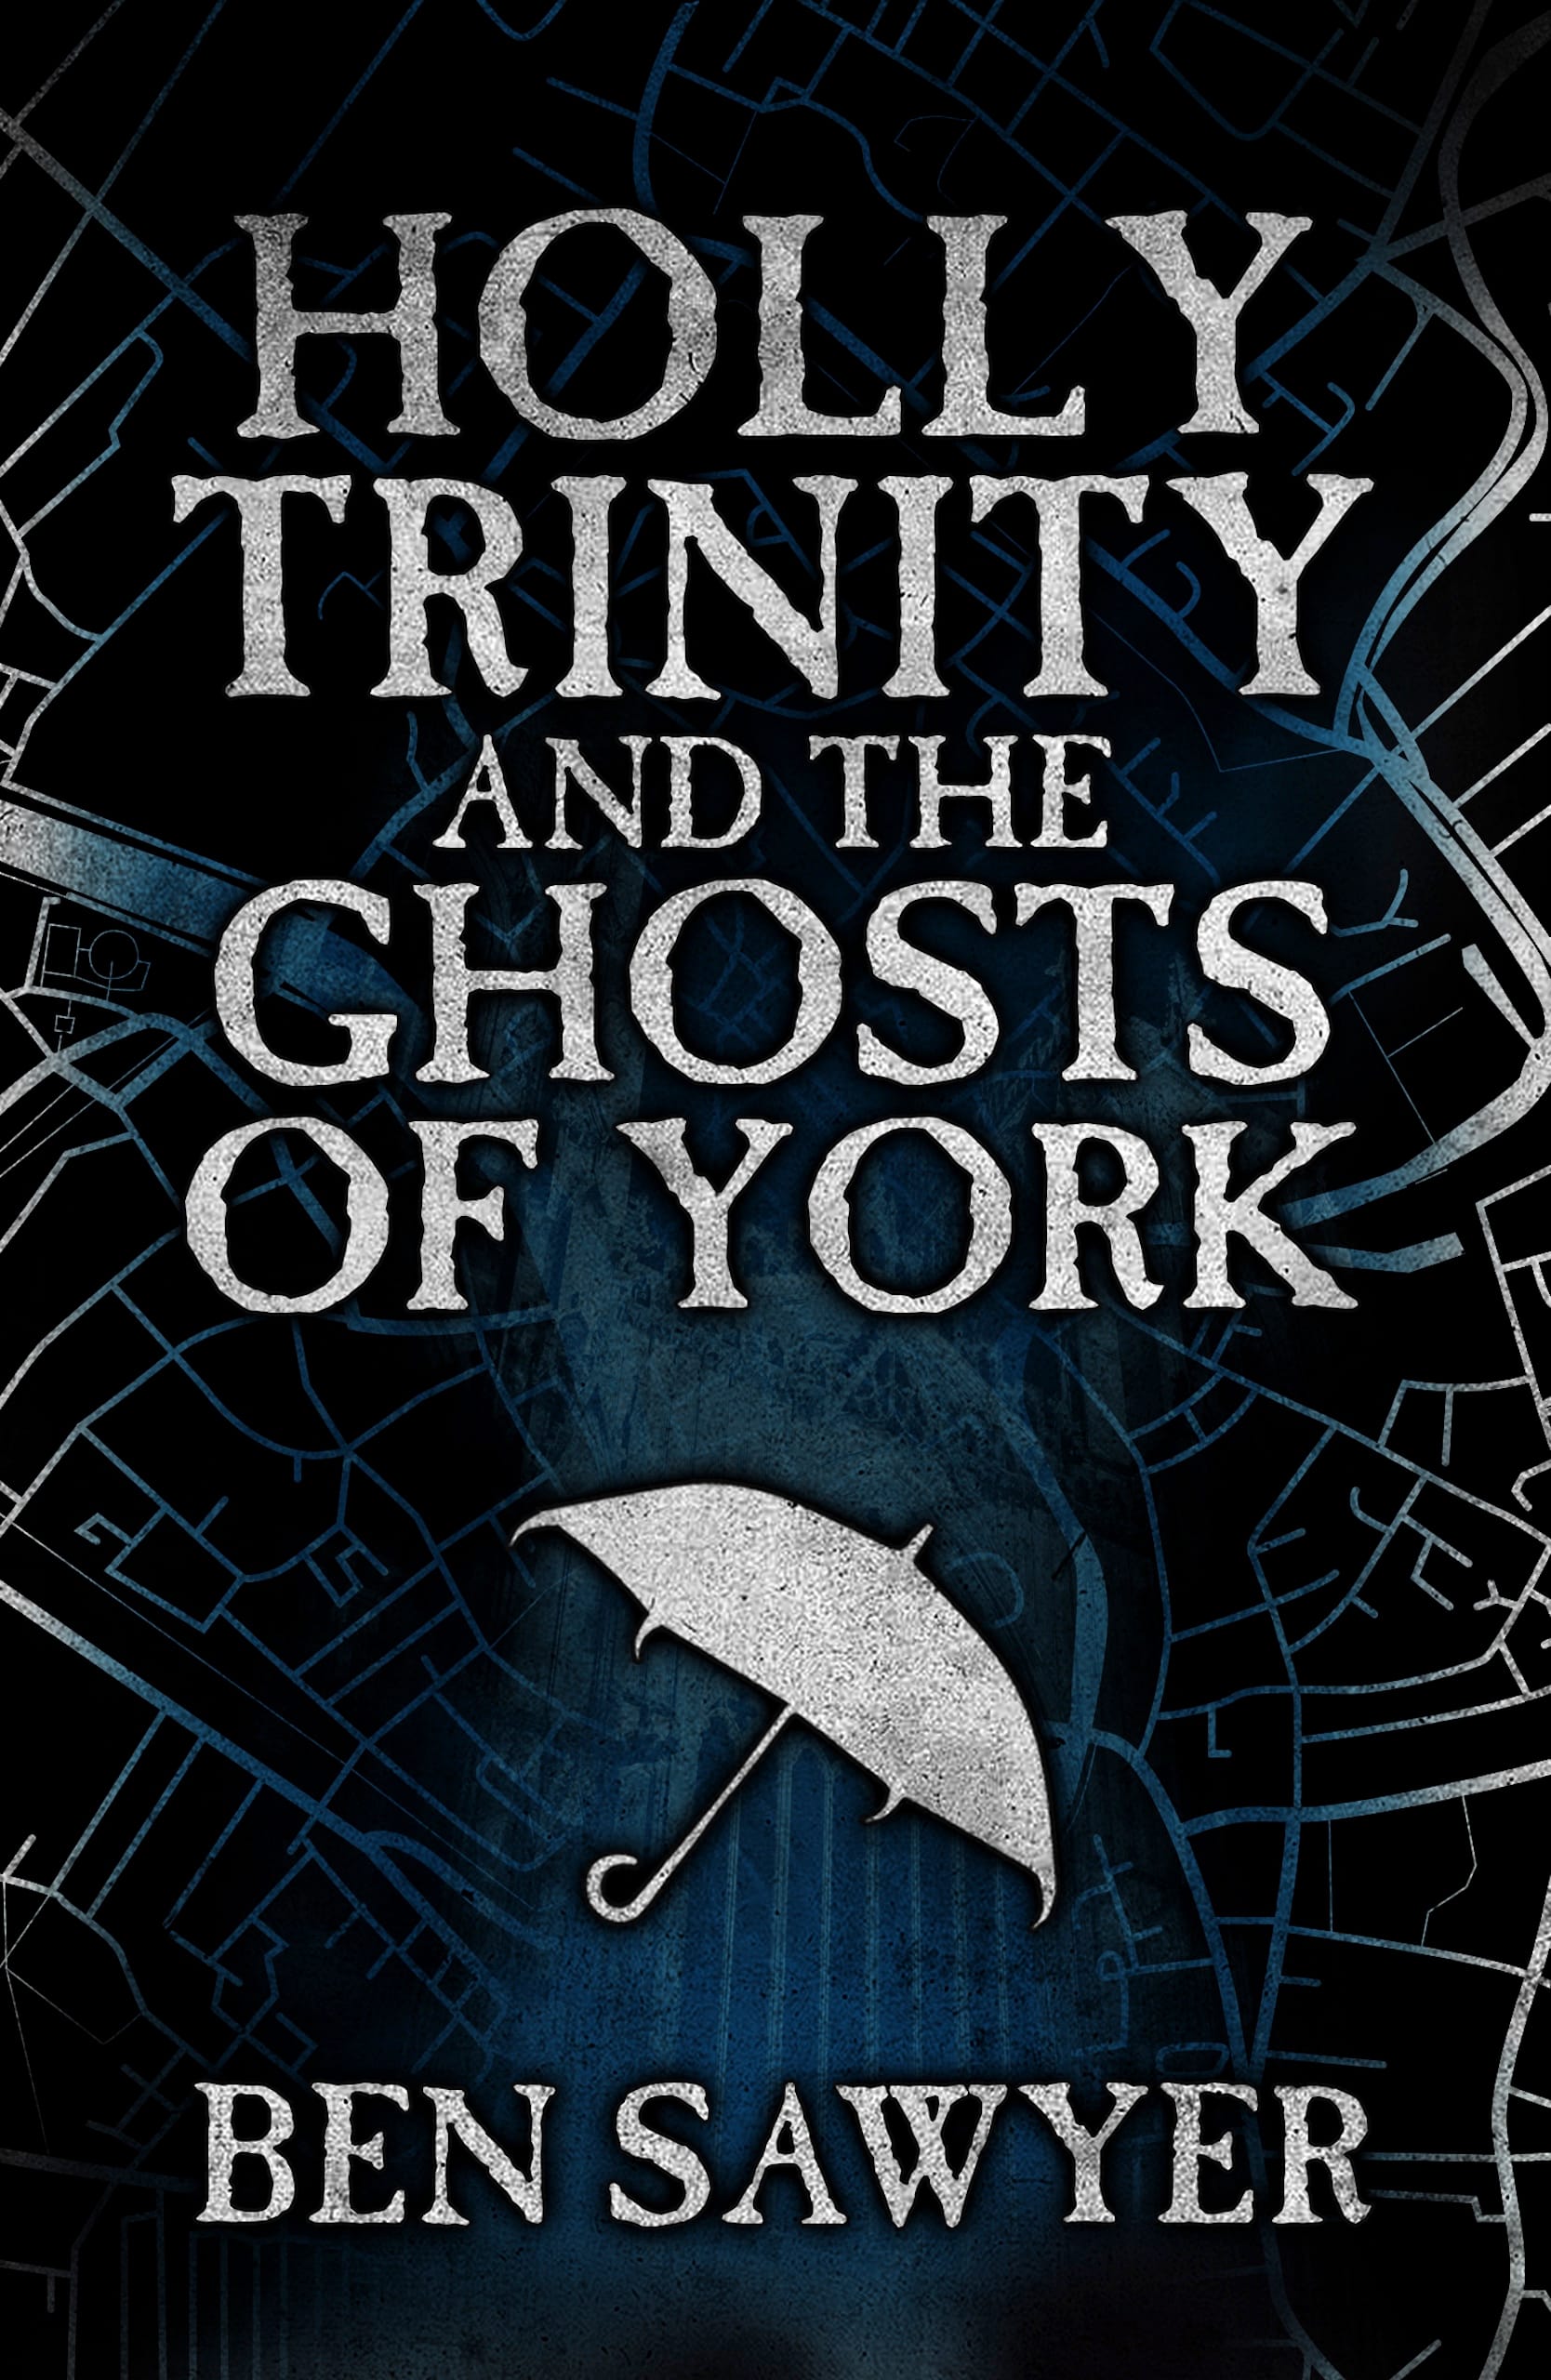 "It doesn’t take much to turn a city like York into something otherwordly..."